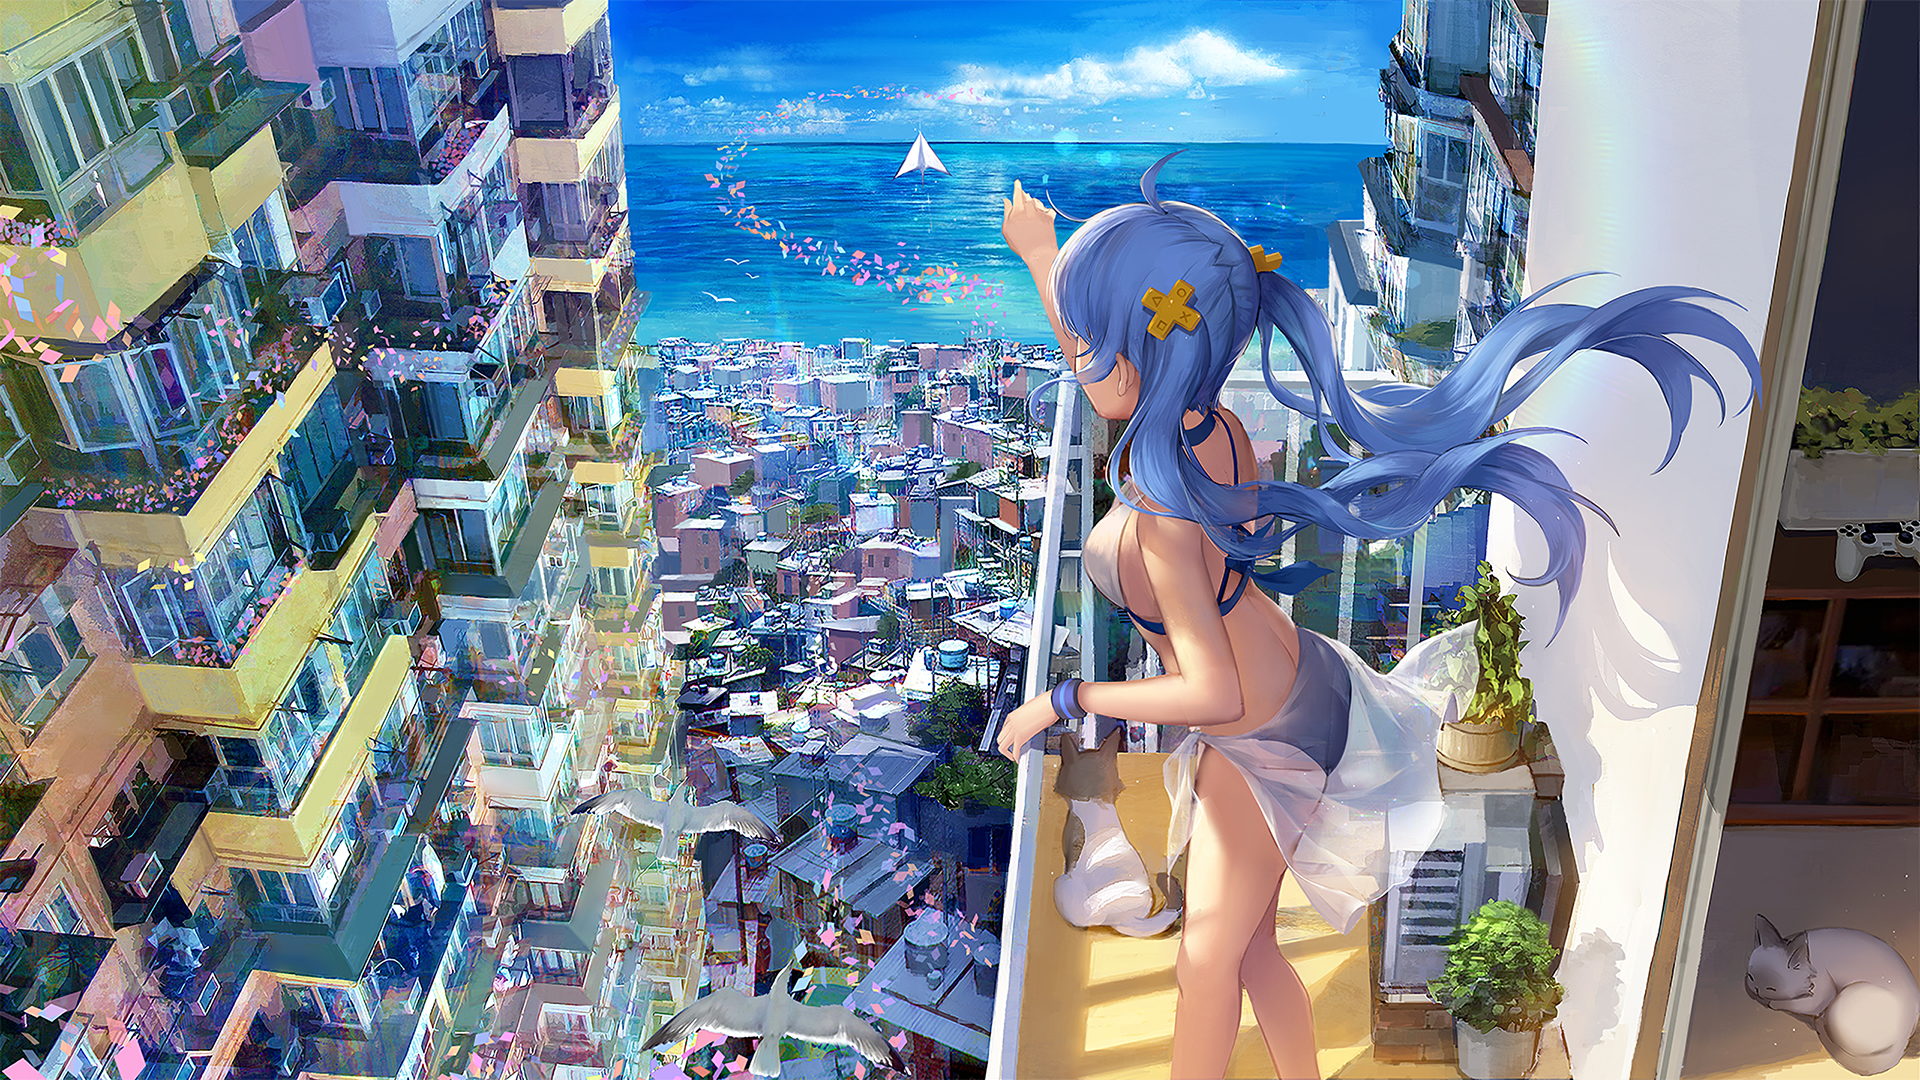 Anime 1920x1080 back anime girls beach building house paper planes bikini PlayStation cityscape water sea birds cats controllers flowers clouds balcony apartments